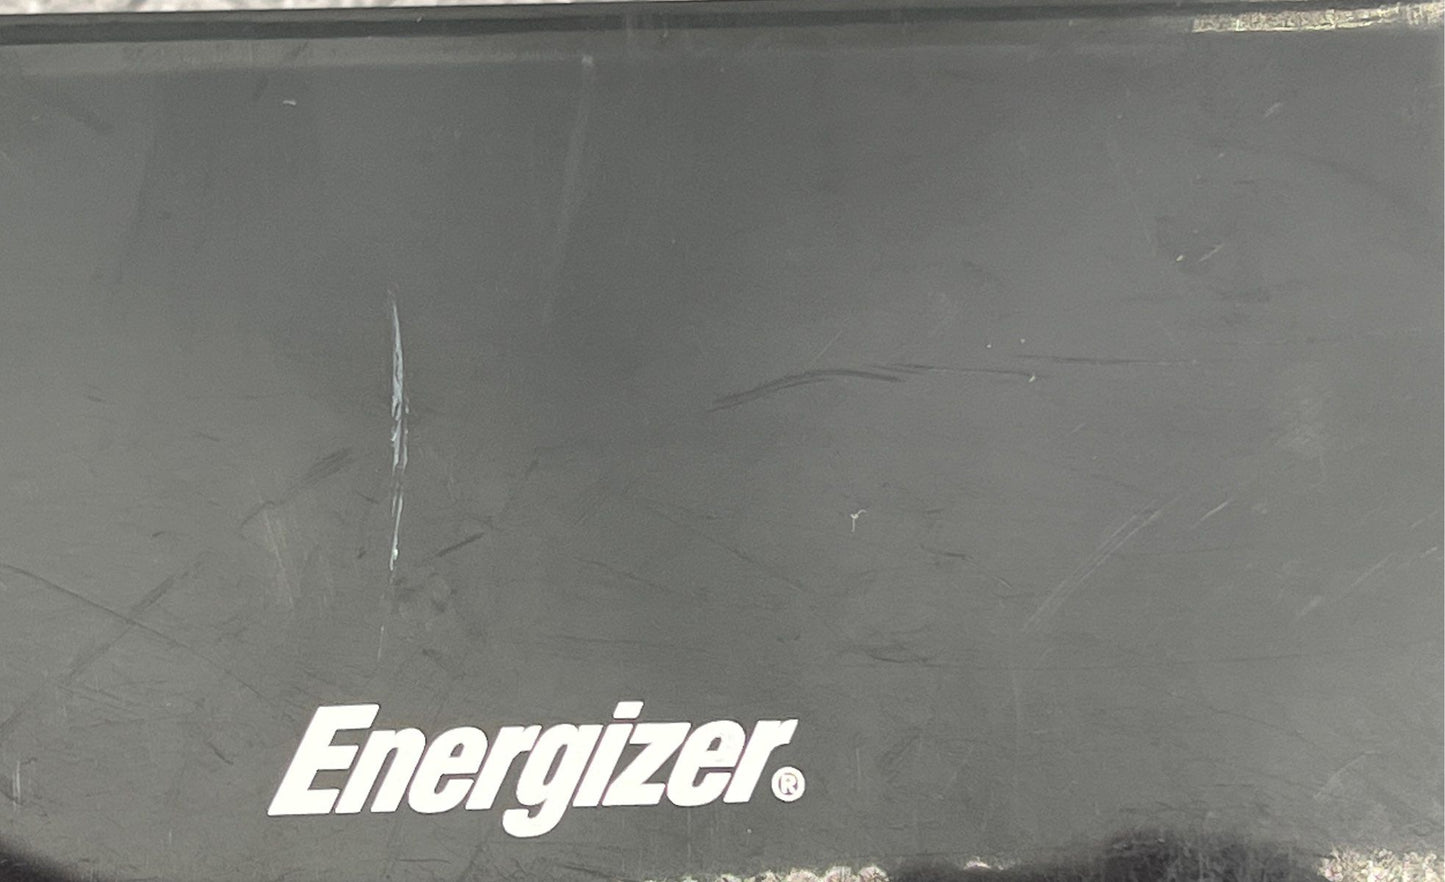 Energizer NiMH Battery Charger Model CHFC2 With User's Manual & Cord